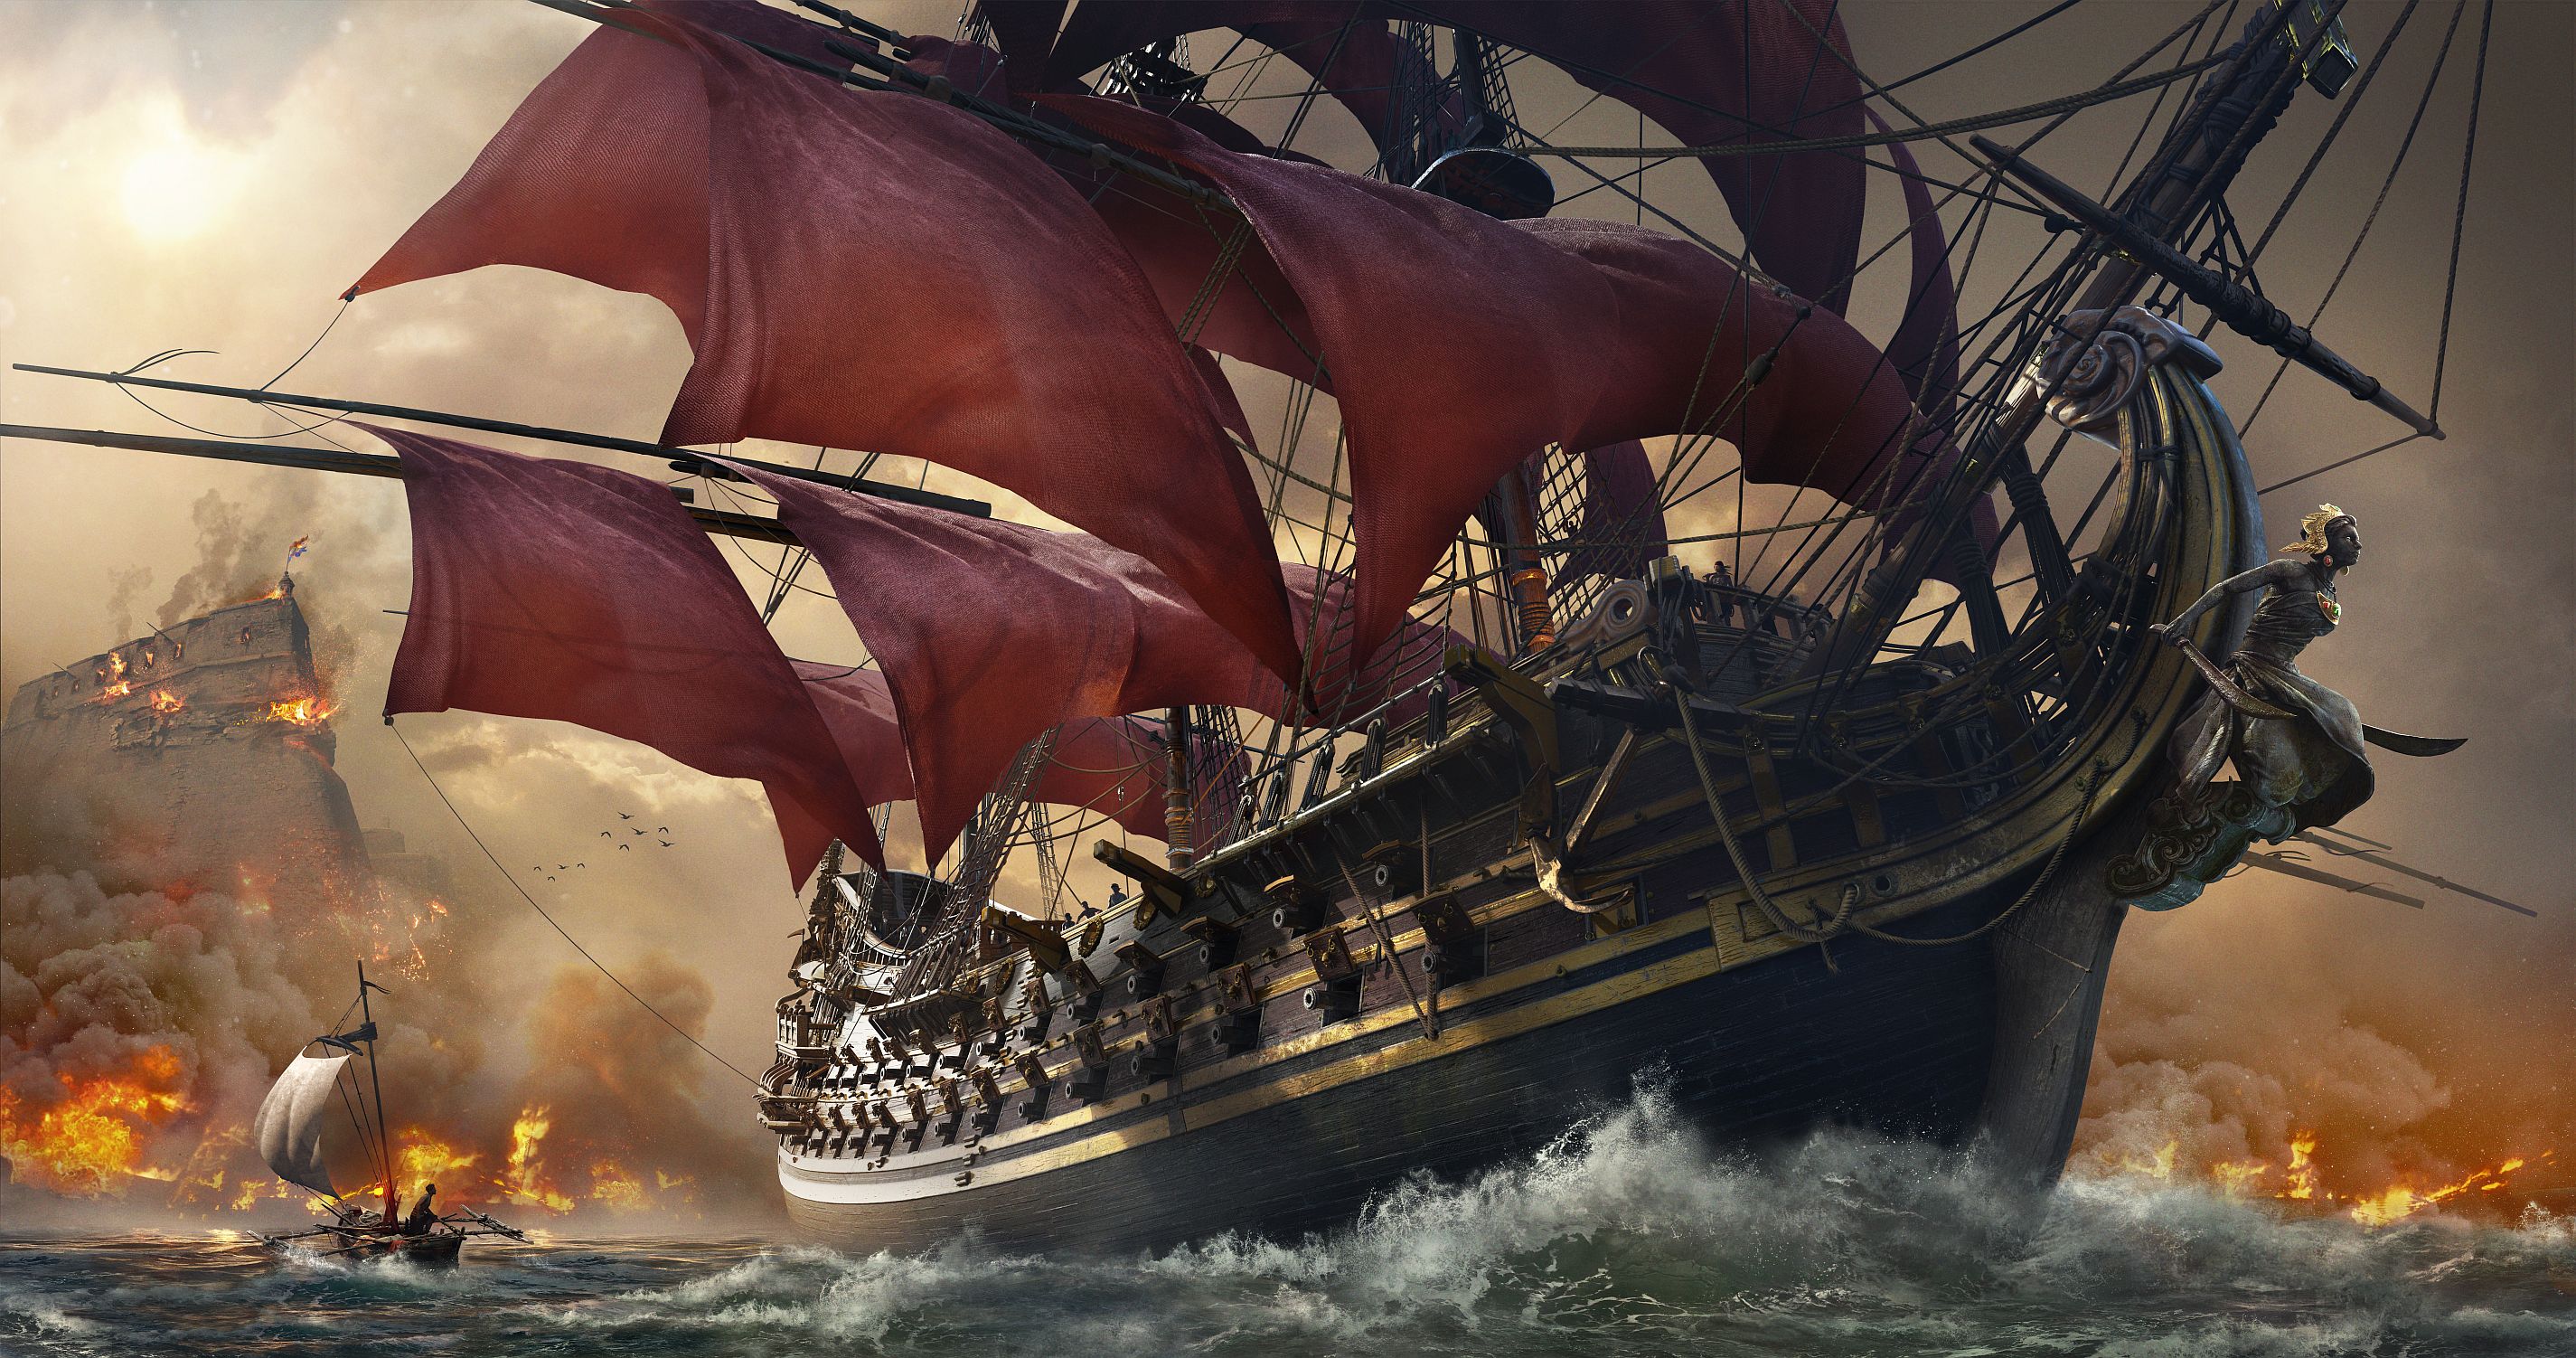 Image for Skull and Bones: PC specs, features, and anti-cheat software detailed